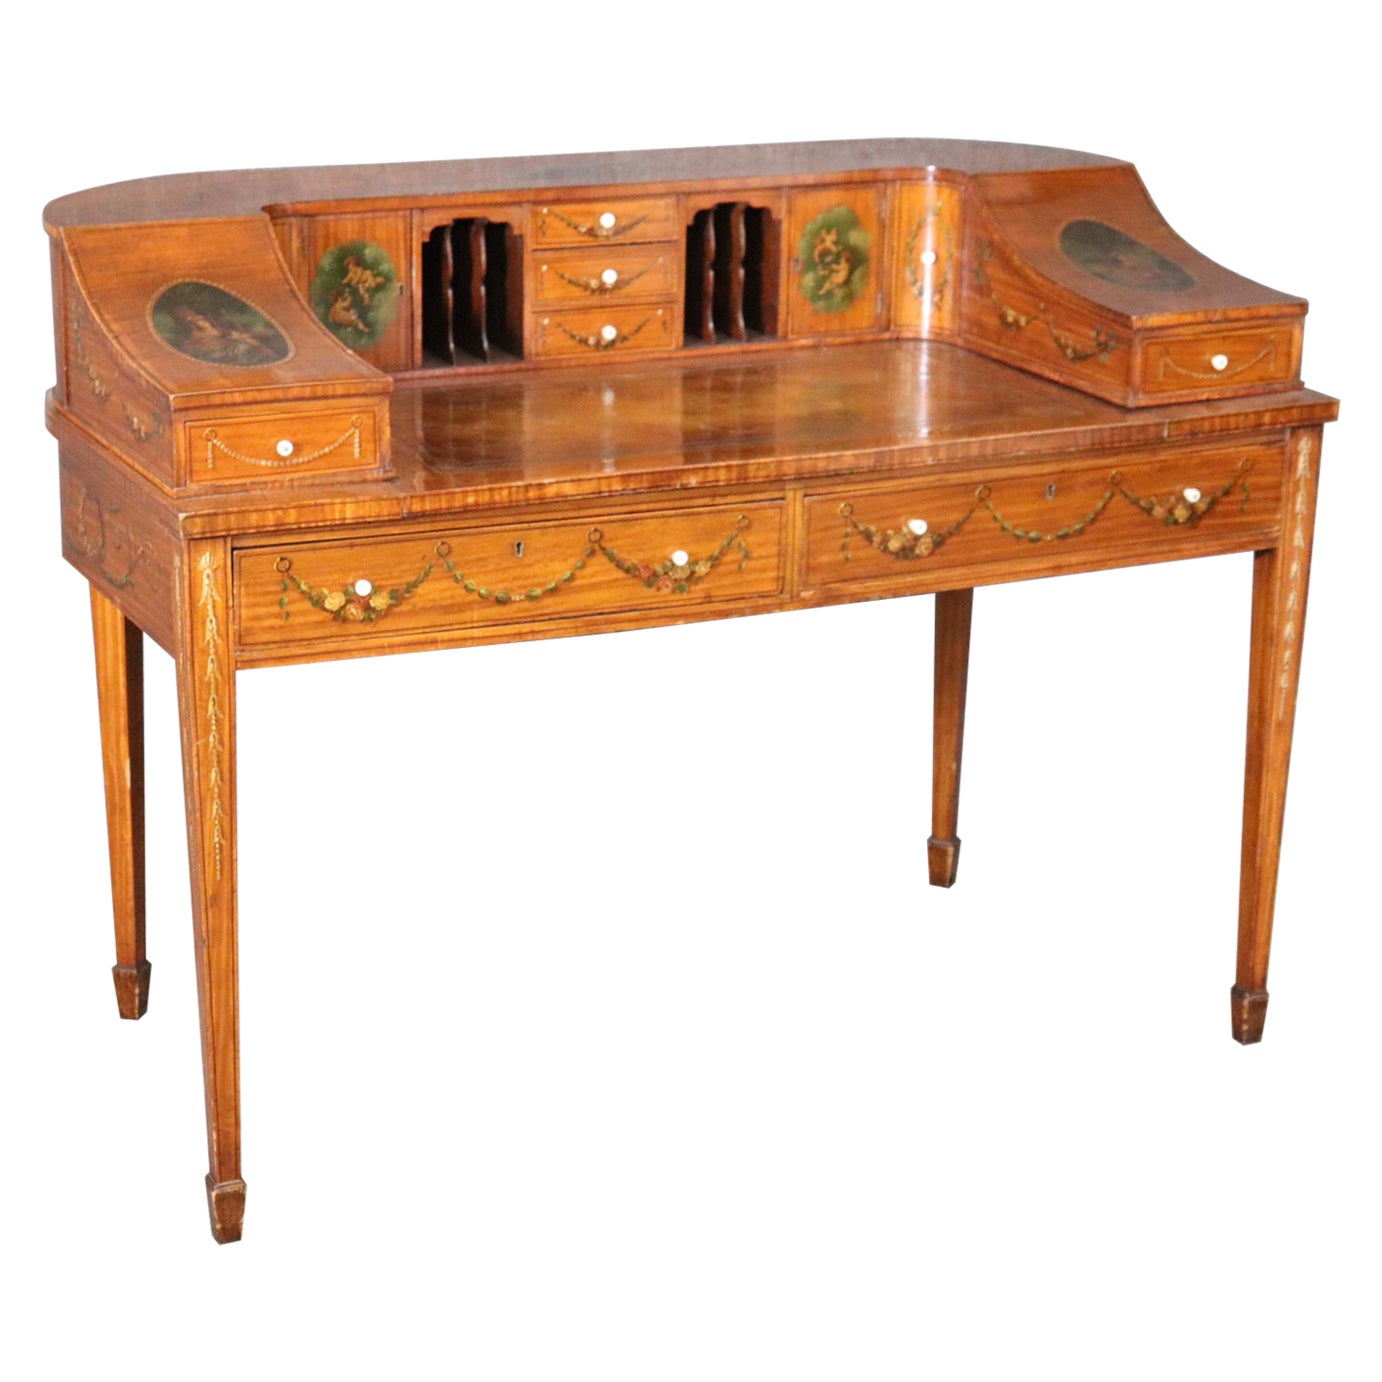 Fine Quality English Satinwood Carlton House Desk with Cherubs and Musical Theme For Sale